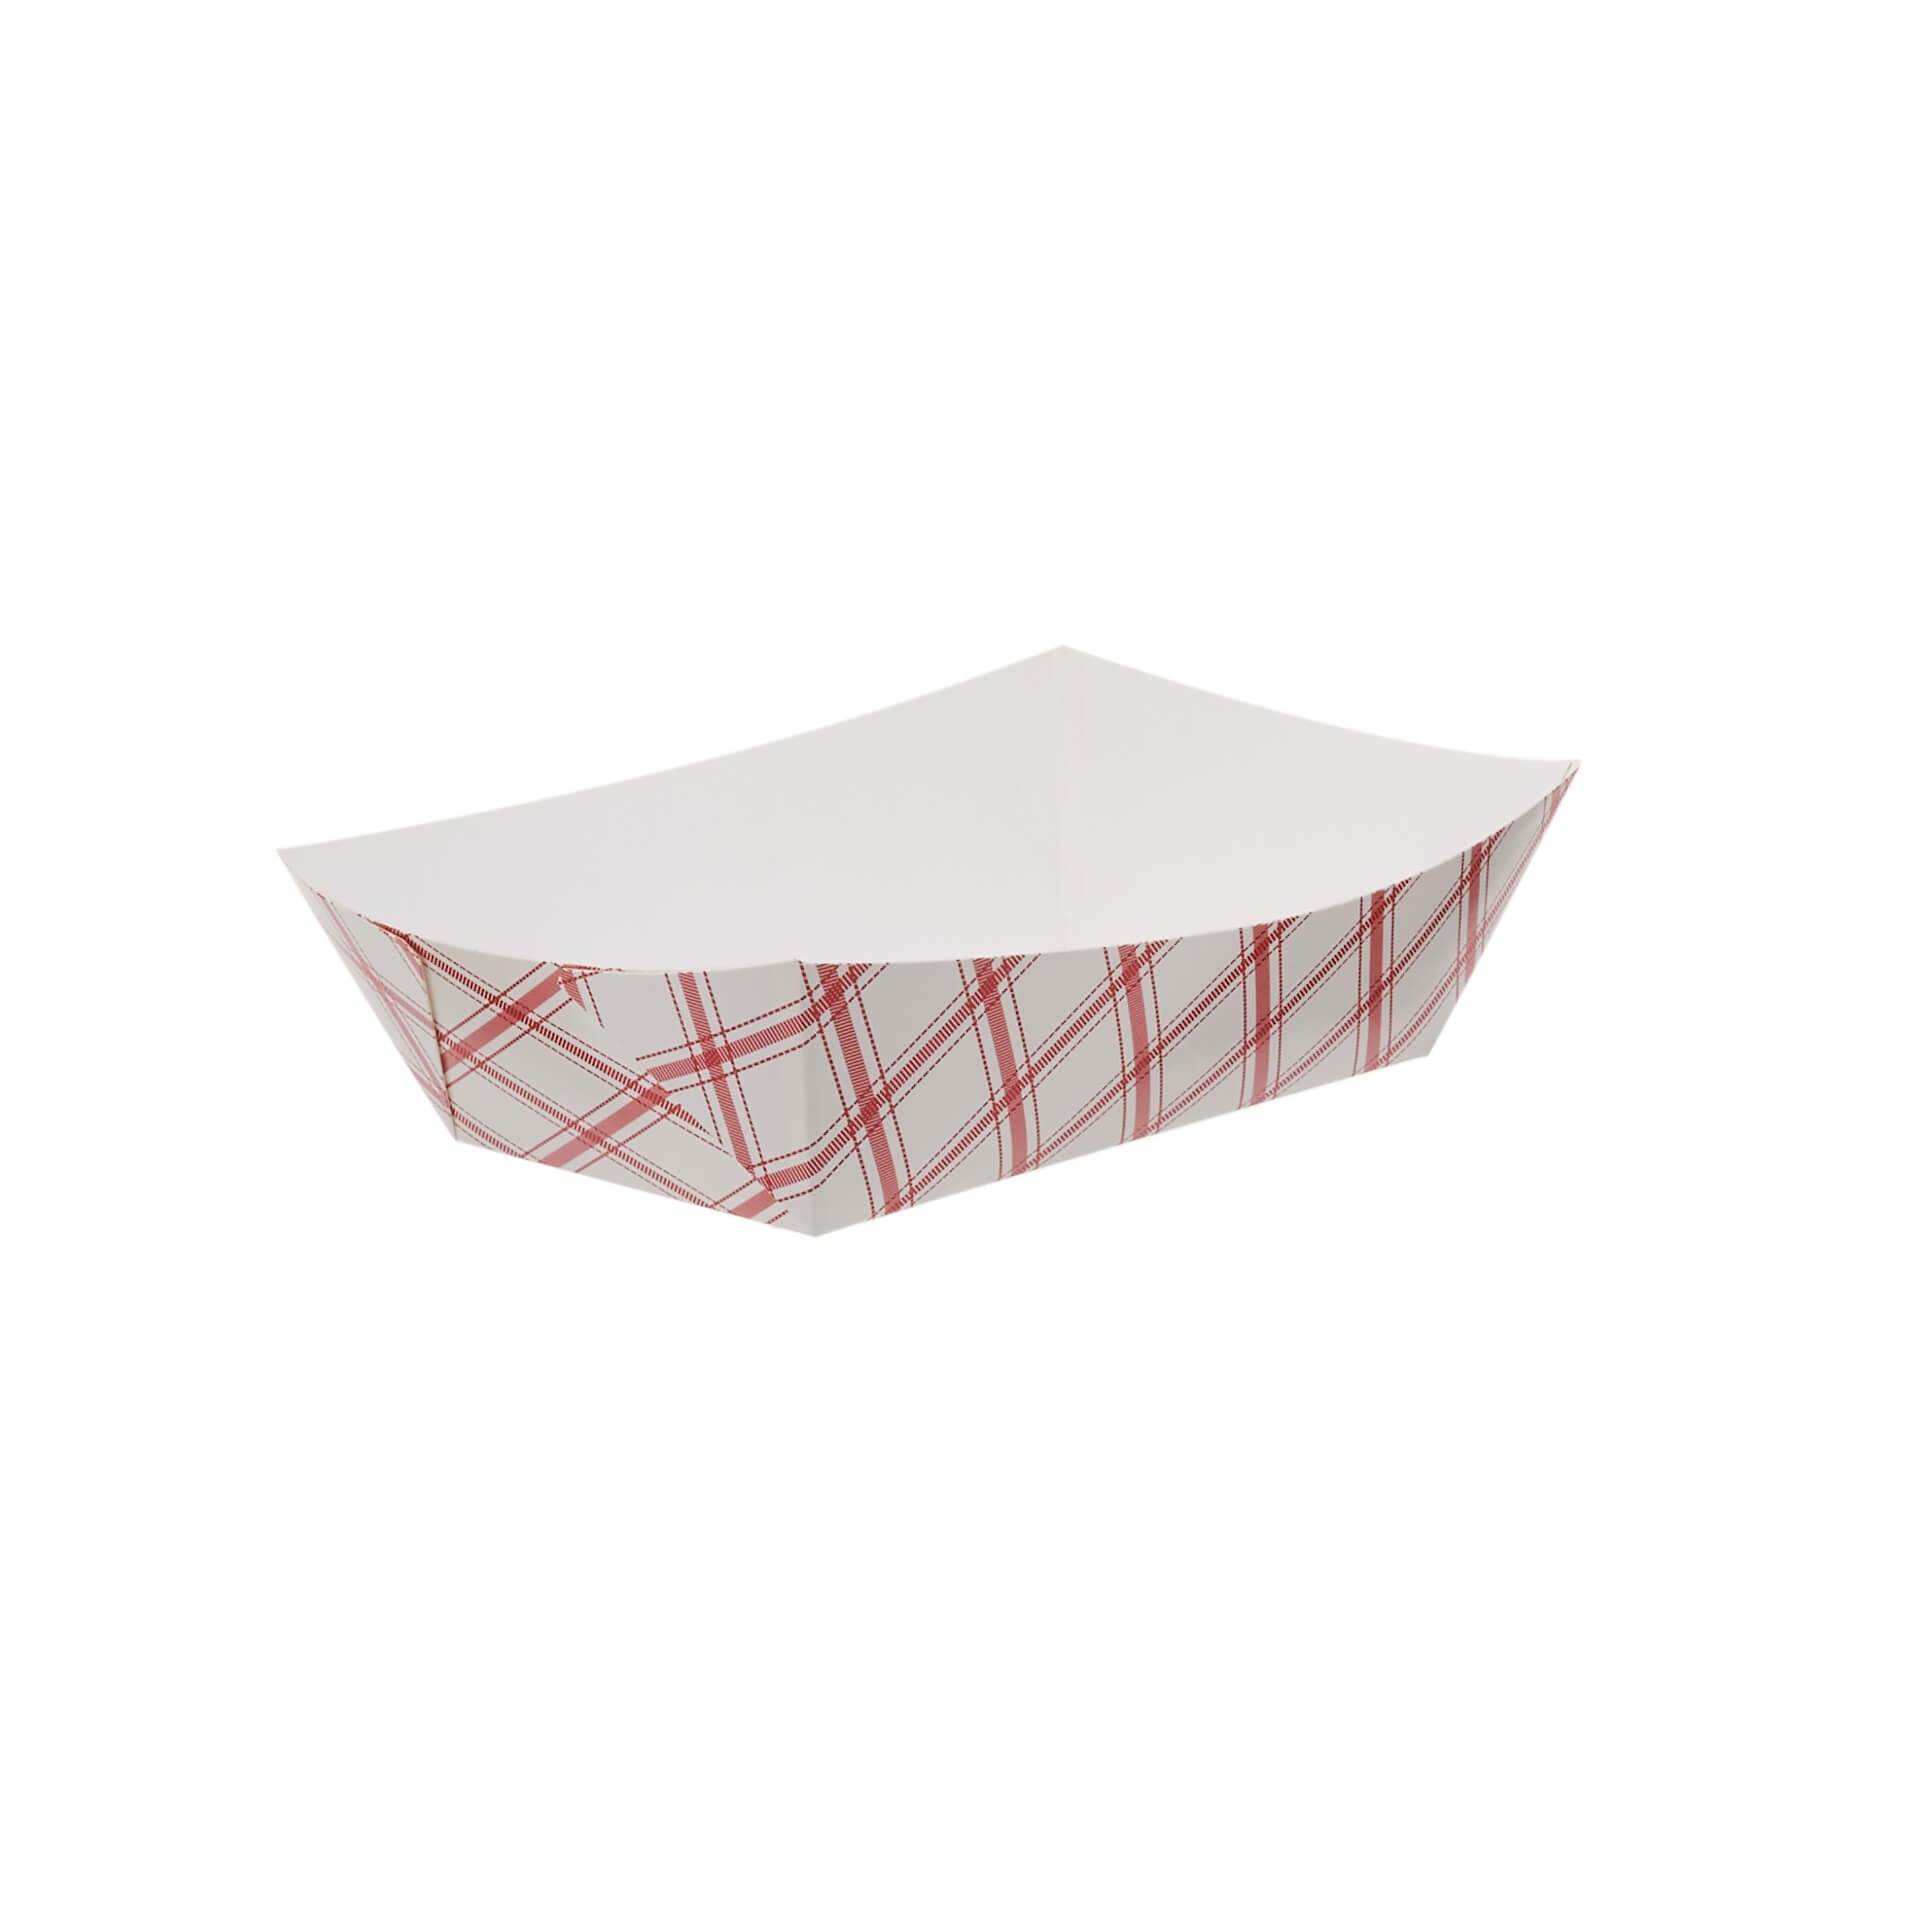 Red and White Boat Tray 2.5 lb #250 concesion food - Hotpack Global